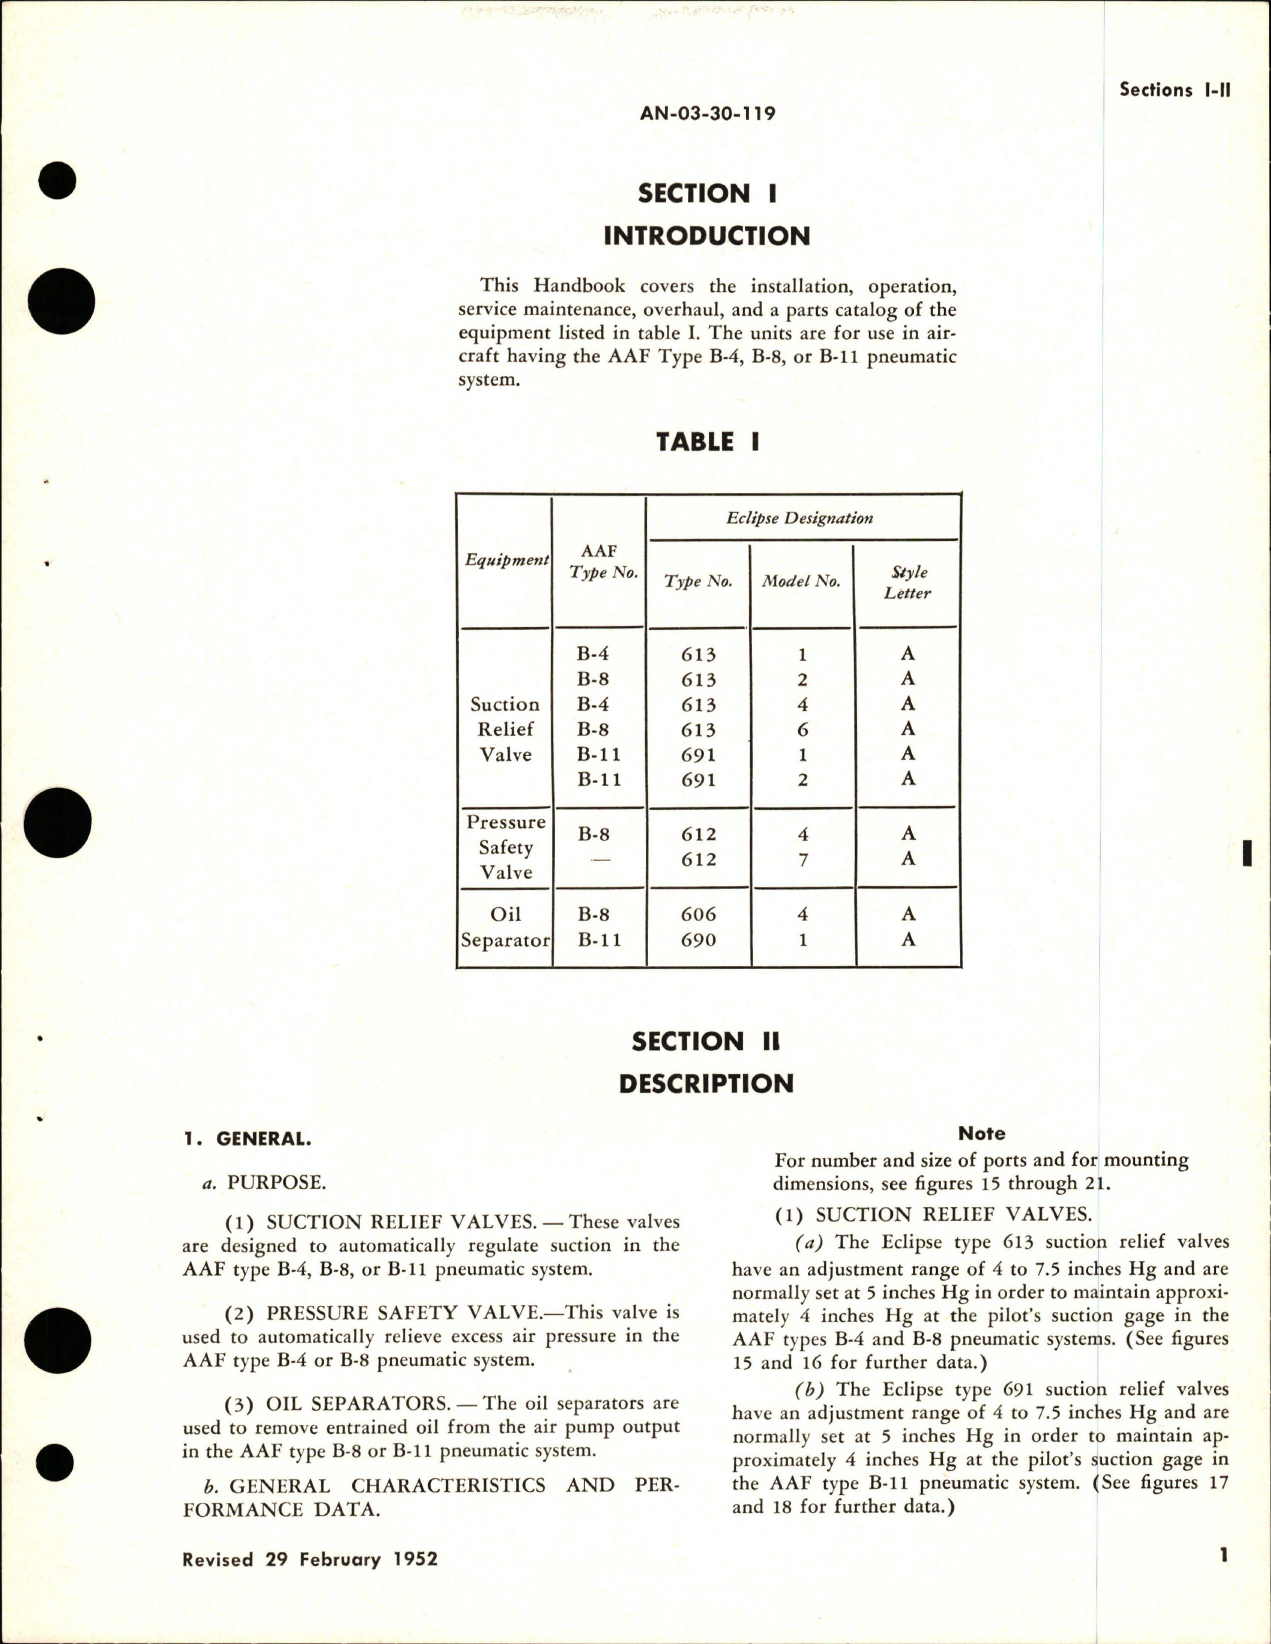 Sample page 7 from AirCorps Library document: Instructions with Parts Catalog for Pneumatic System Valves - Types B-4, B-8, B-11, and 612-7-A